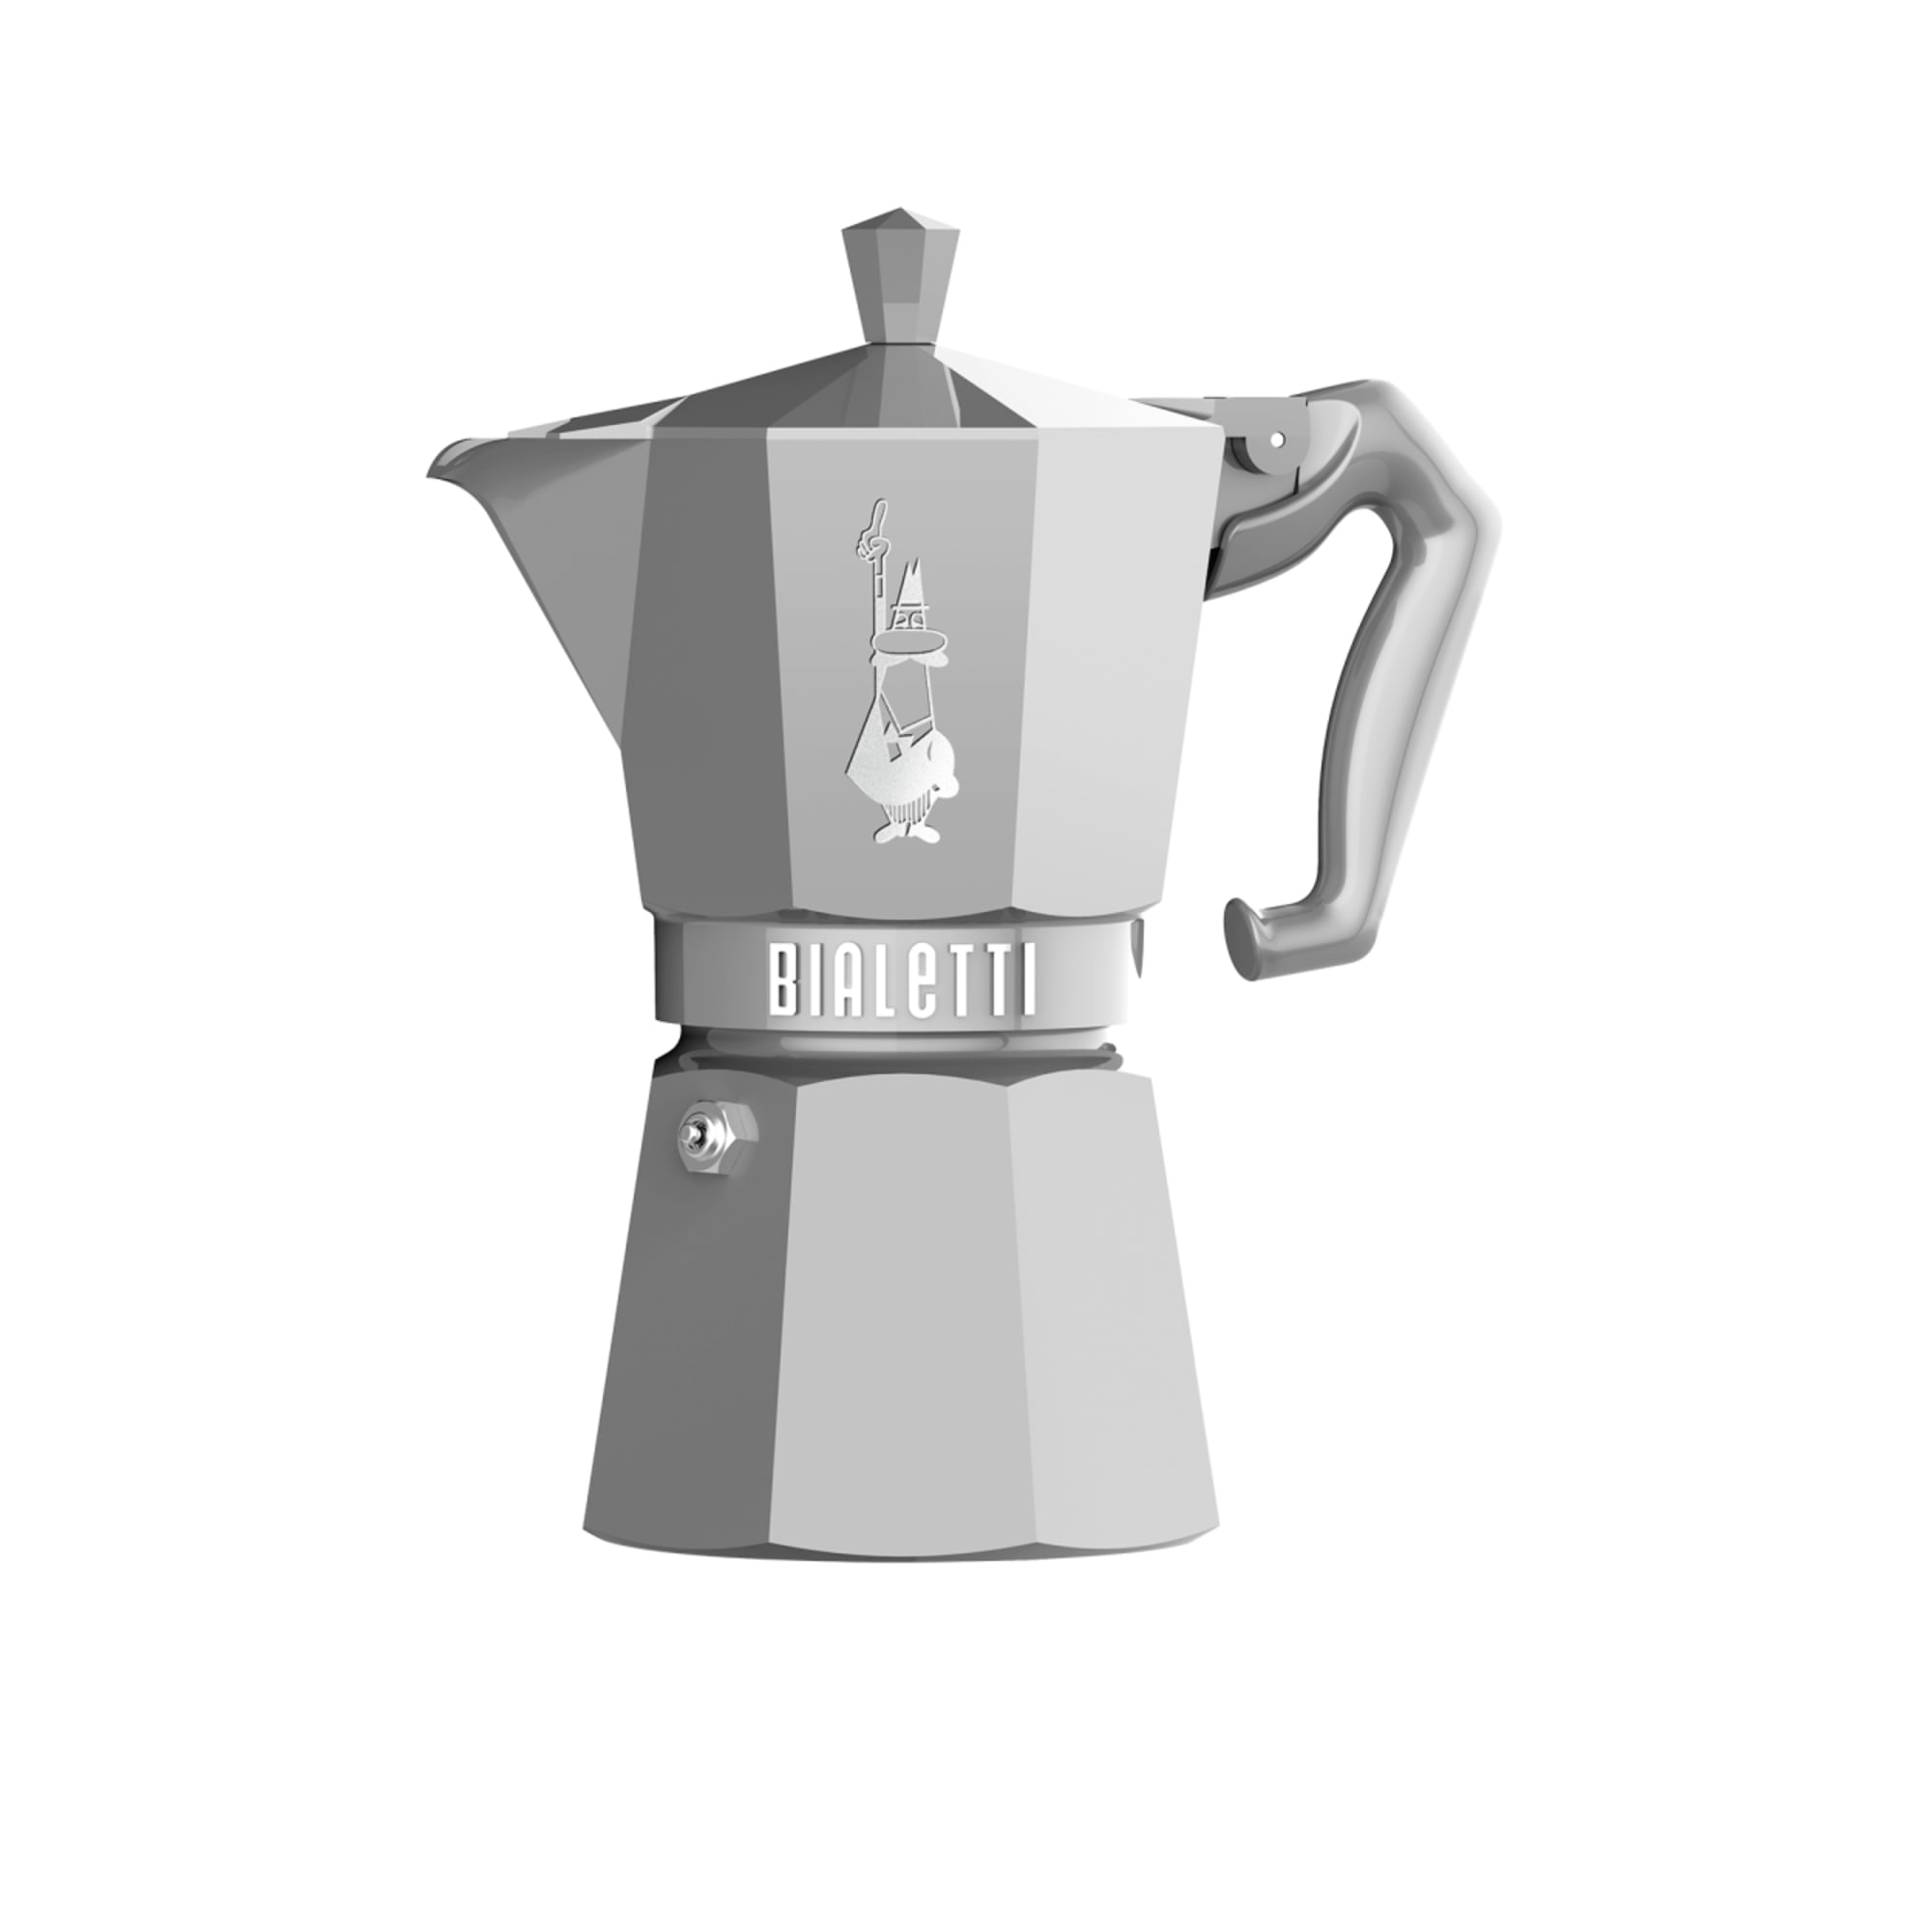 We're Cooking Now & Loving our Bialetti Silver TI Cookware! - BB Product  Reviews